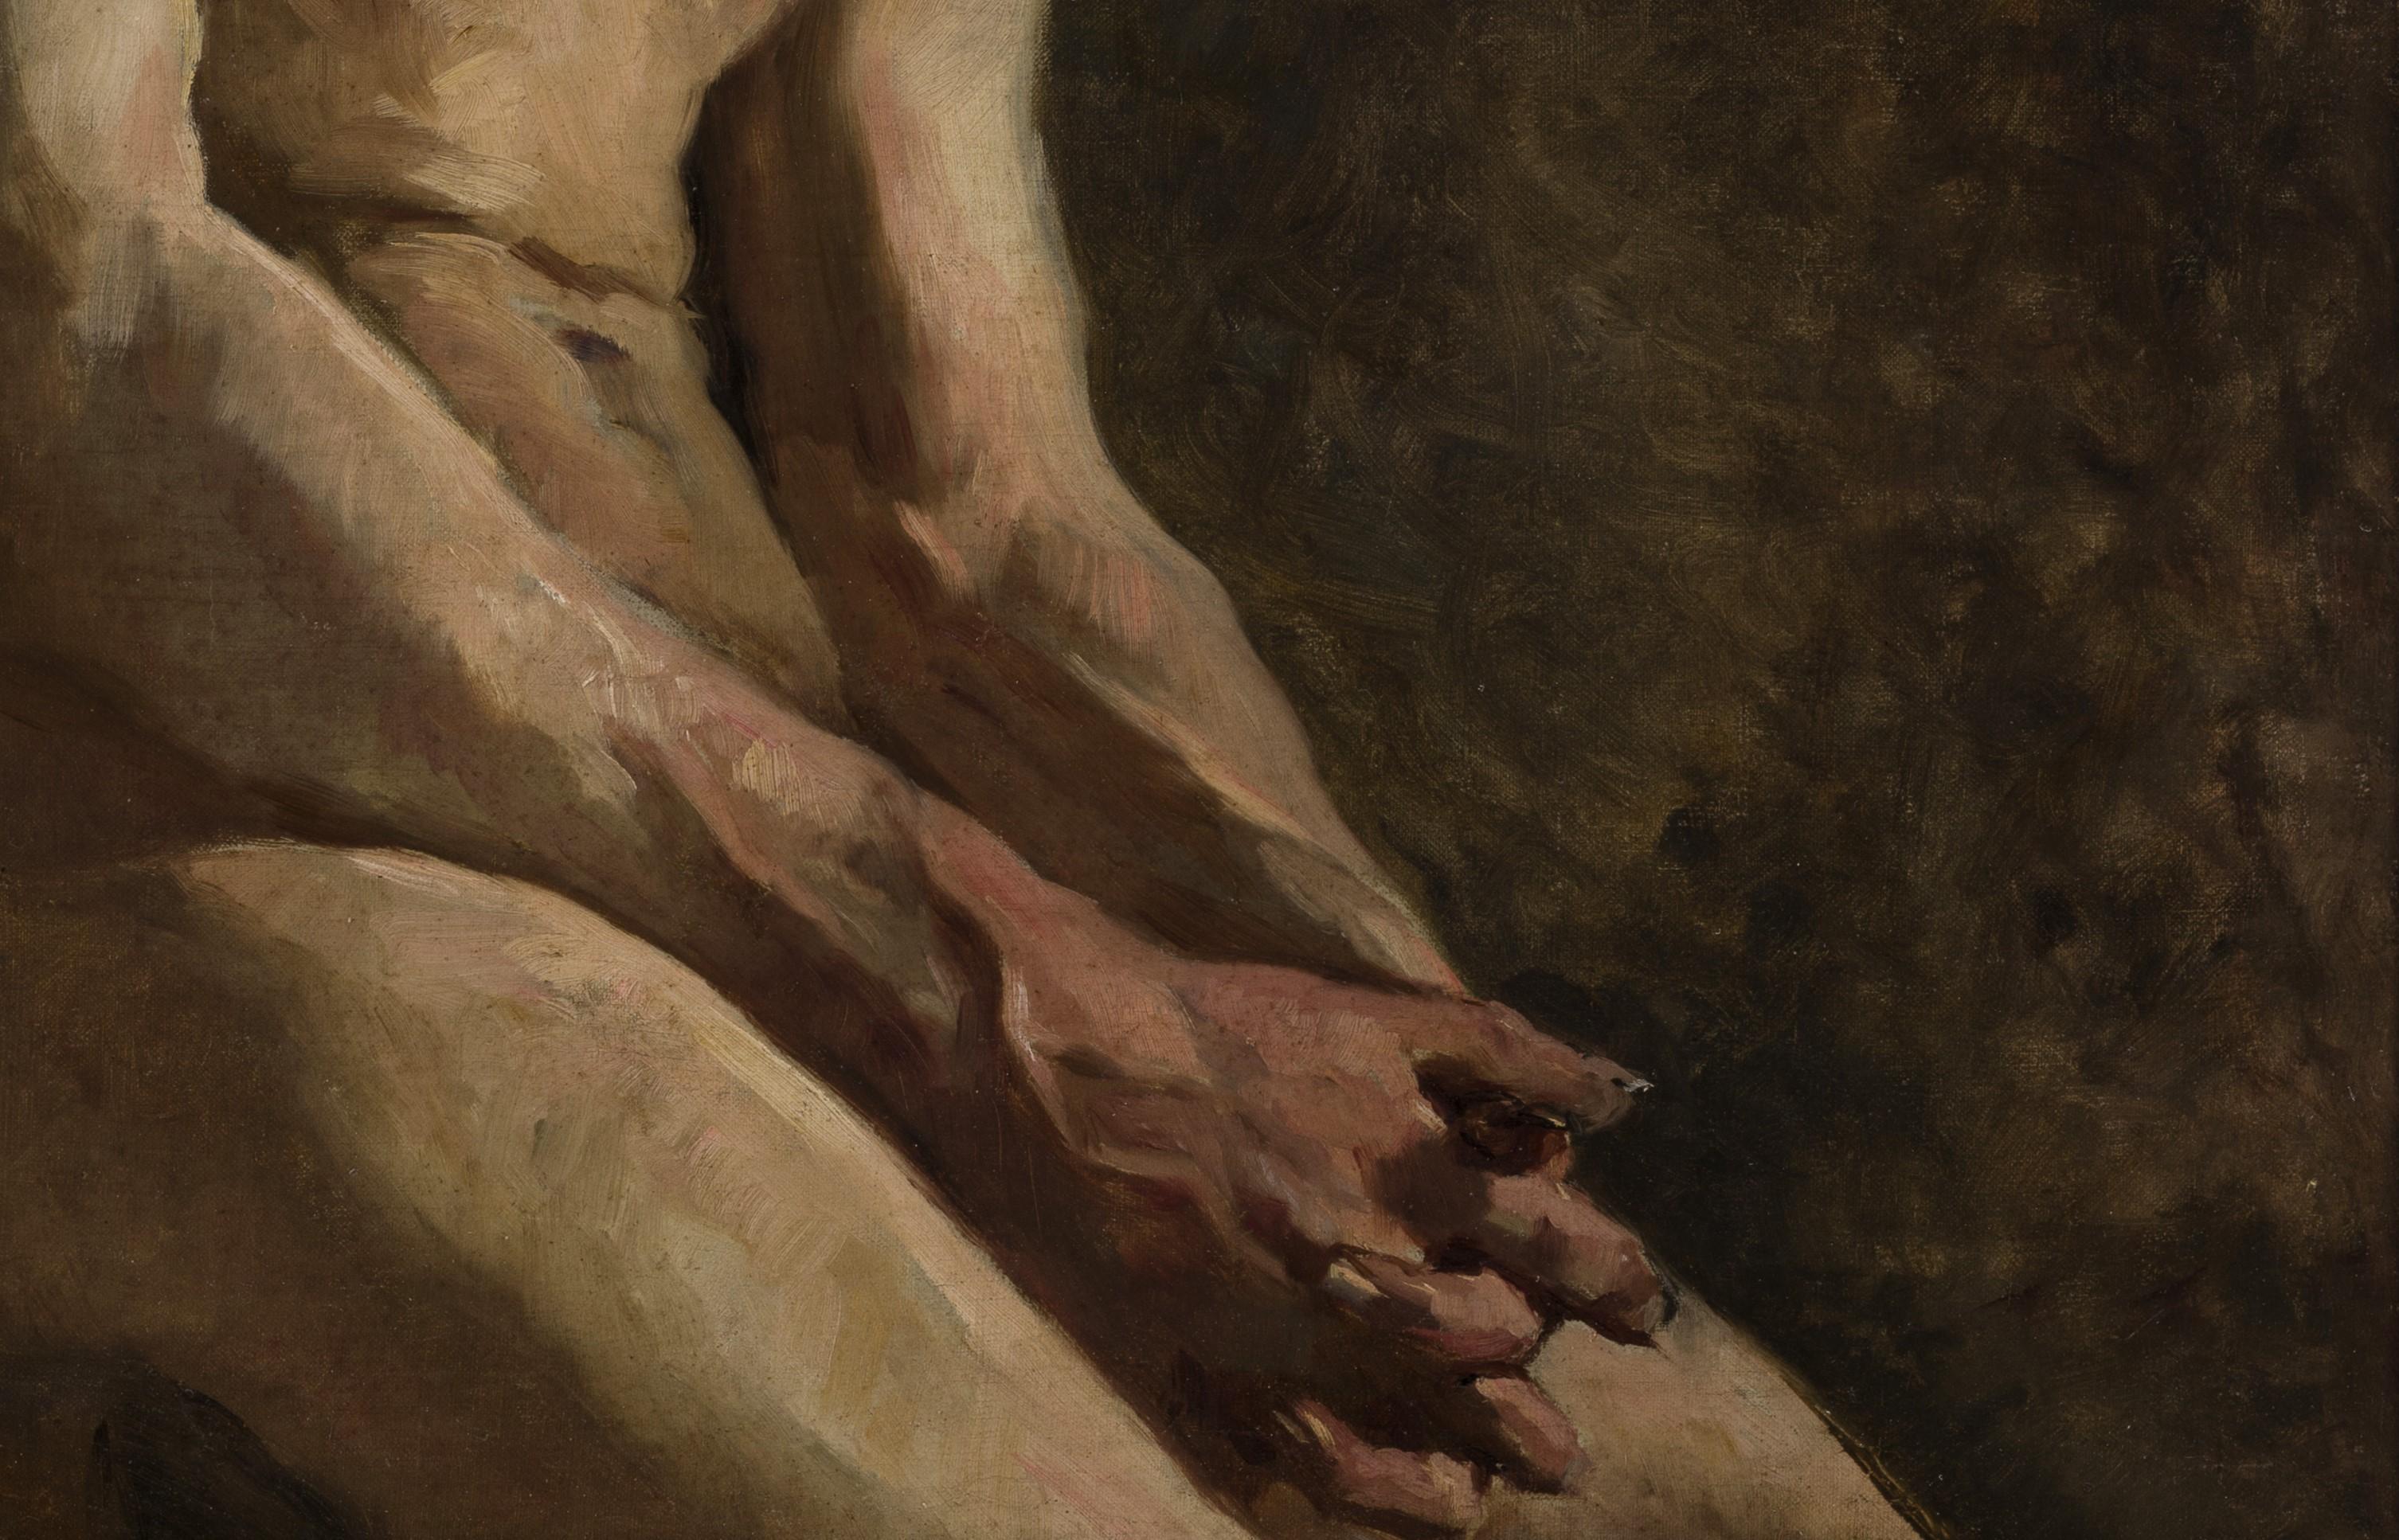 Spanish School, Seated Male Nude, c.1900, oil on canvas, 69cm x 55cm, (81cm x 66cm framed)

This figure study is unusual in that it beautifully captures the character of the sitter, something which is often lost in studies of the period. This deeply